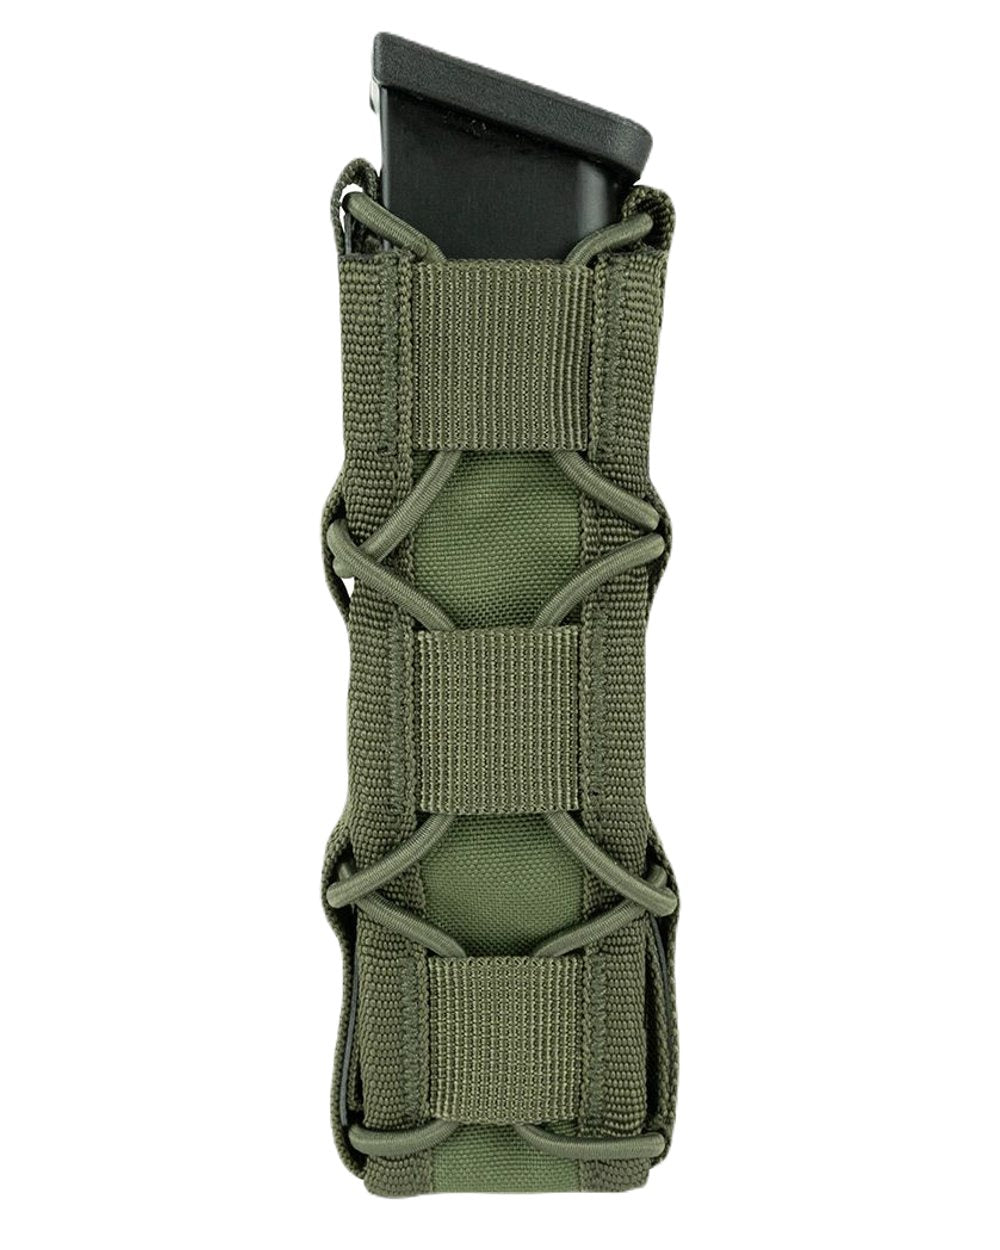 Viper Elite Extended Pistol Mag Pouch In Green 